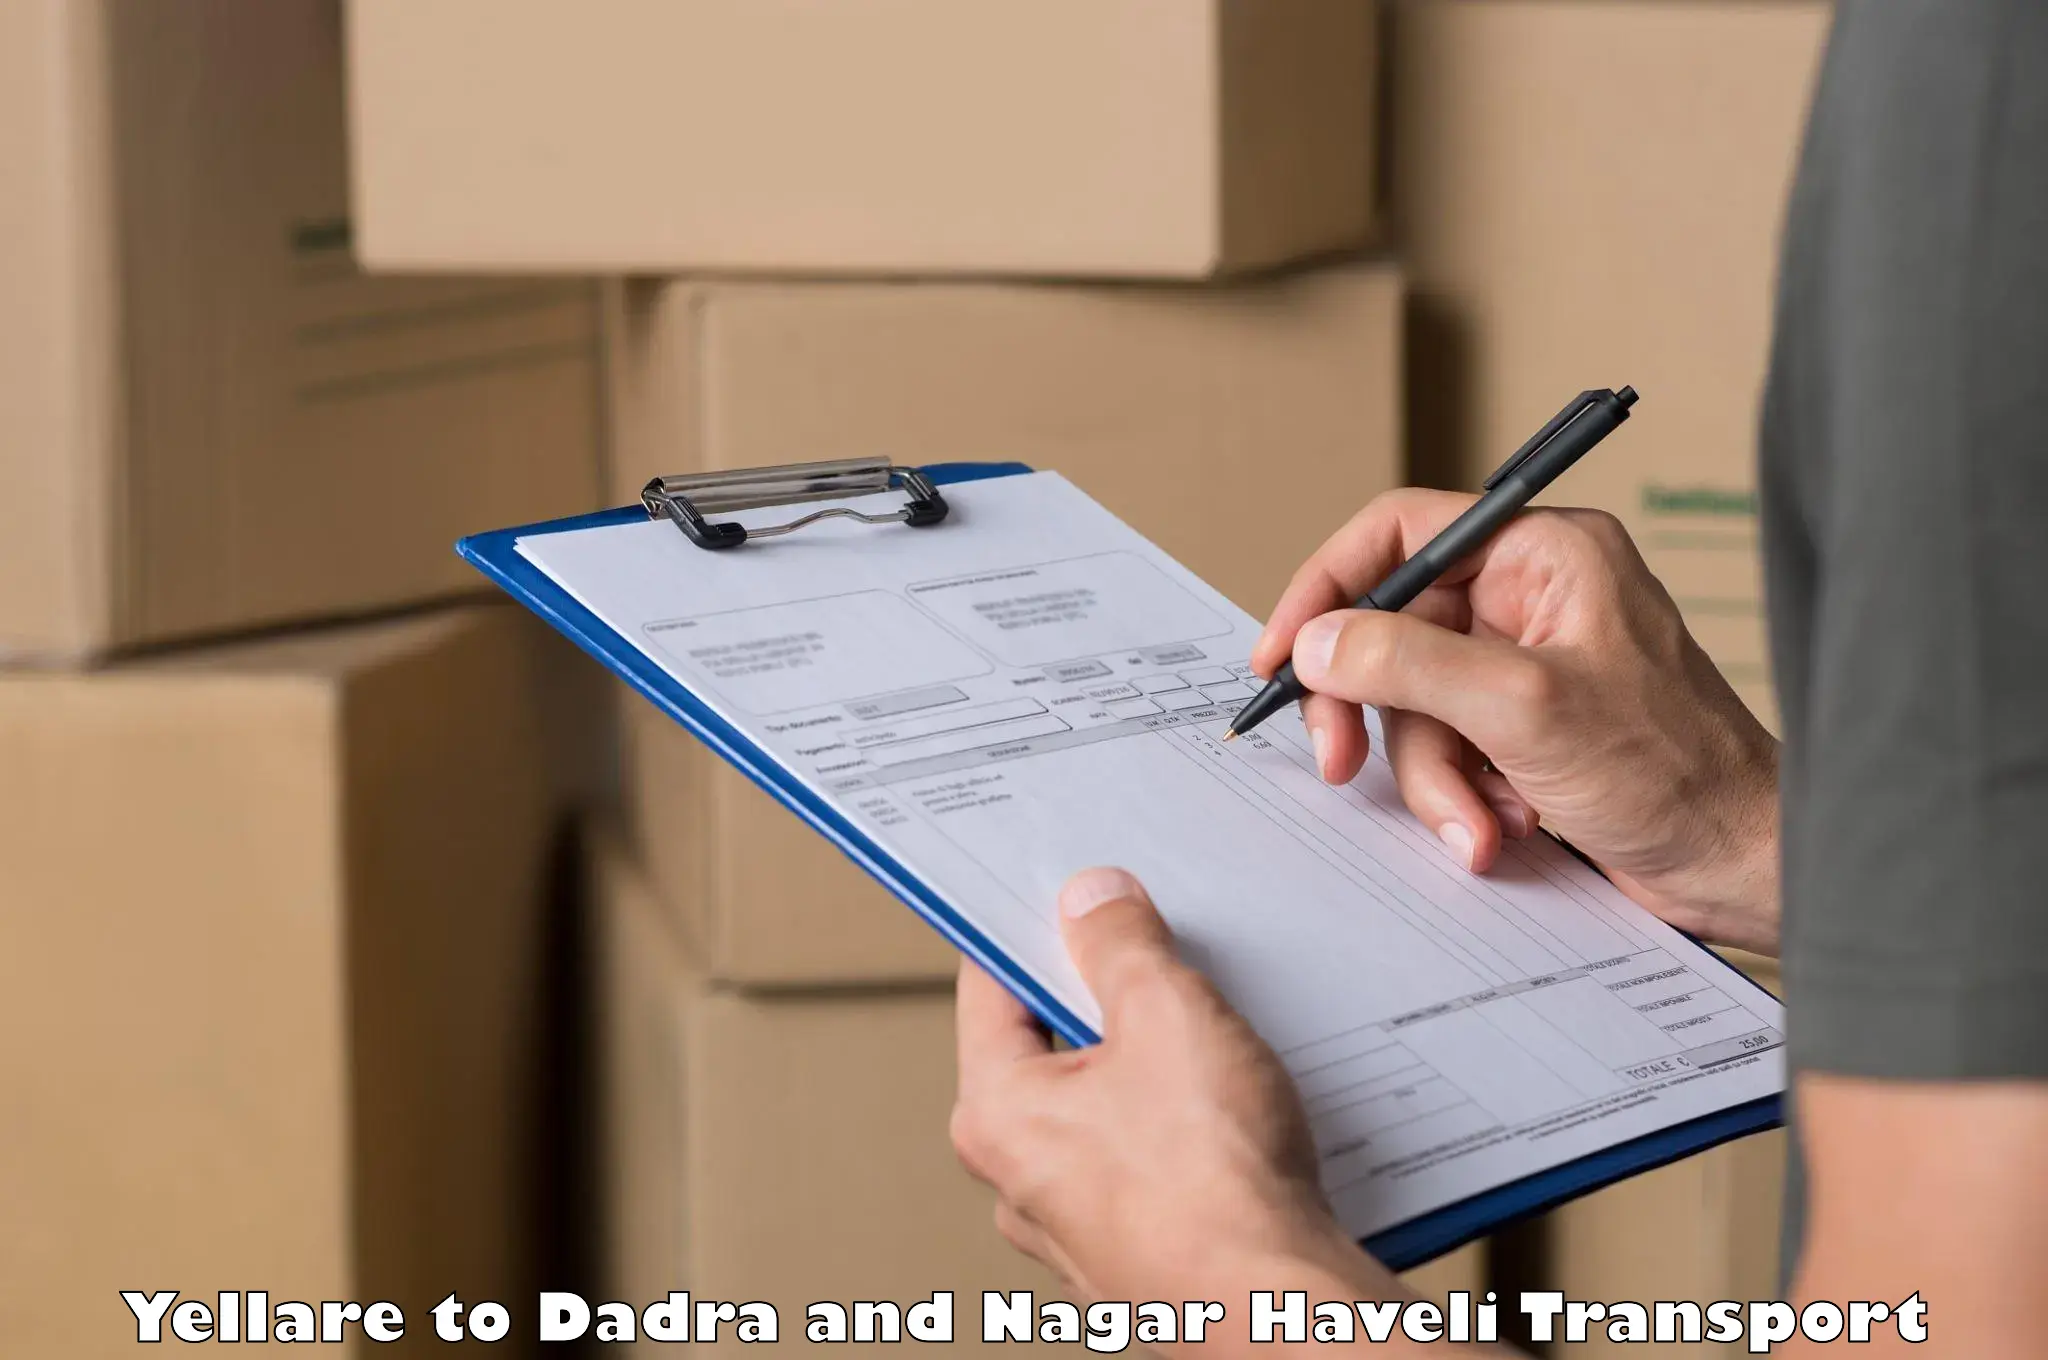 Air cargo transport services in Yellare to Dadra and Nagar Haveli